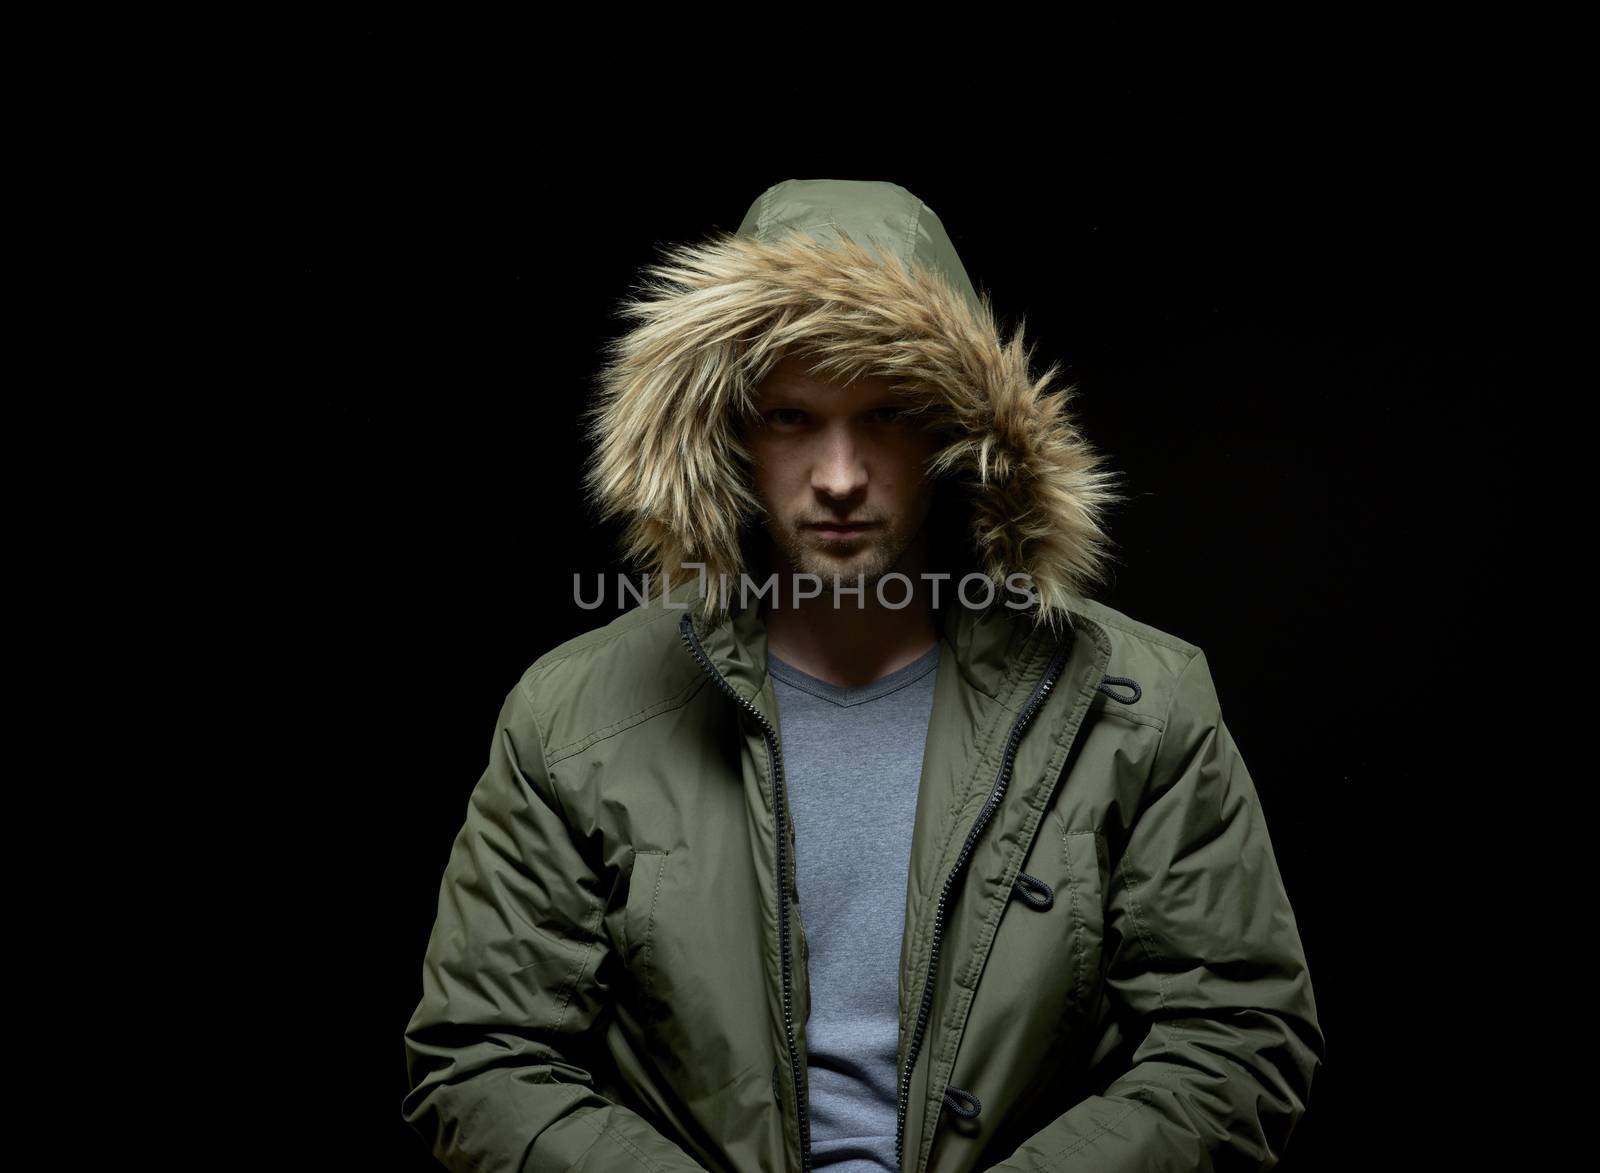 Low key studio portrait of suspicious young adult caucasian model wearing winter coat with hood on. Isolated on black.